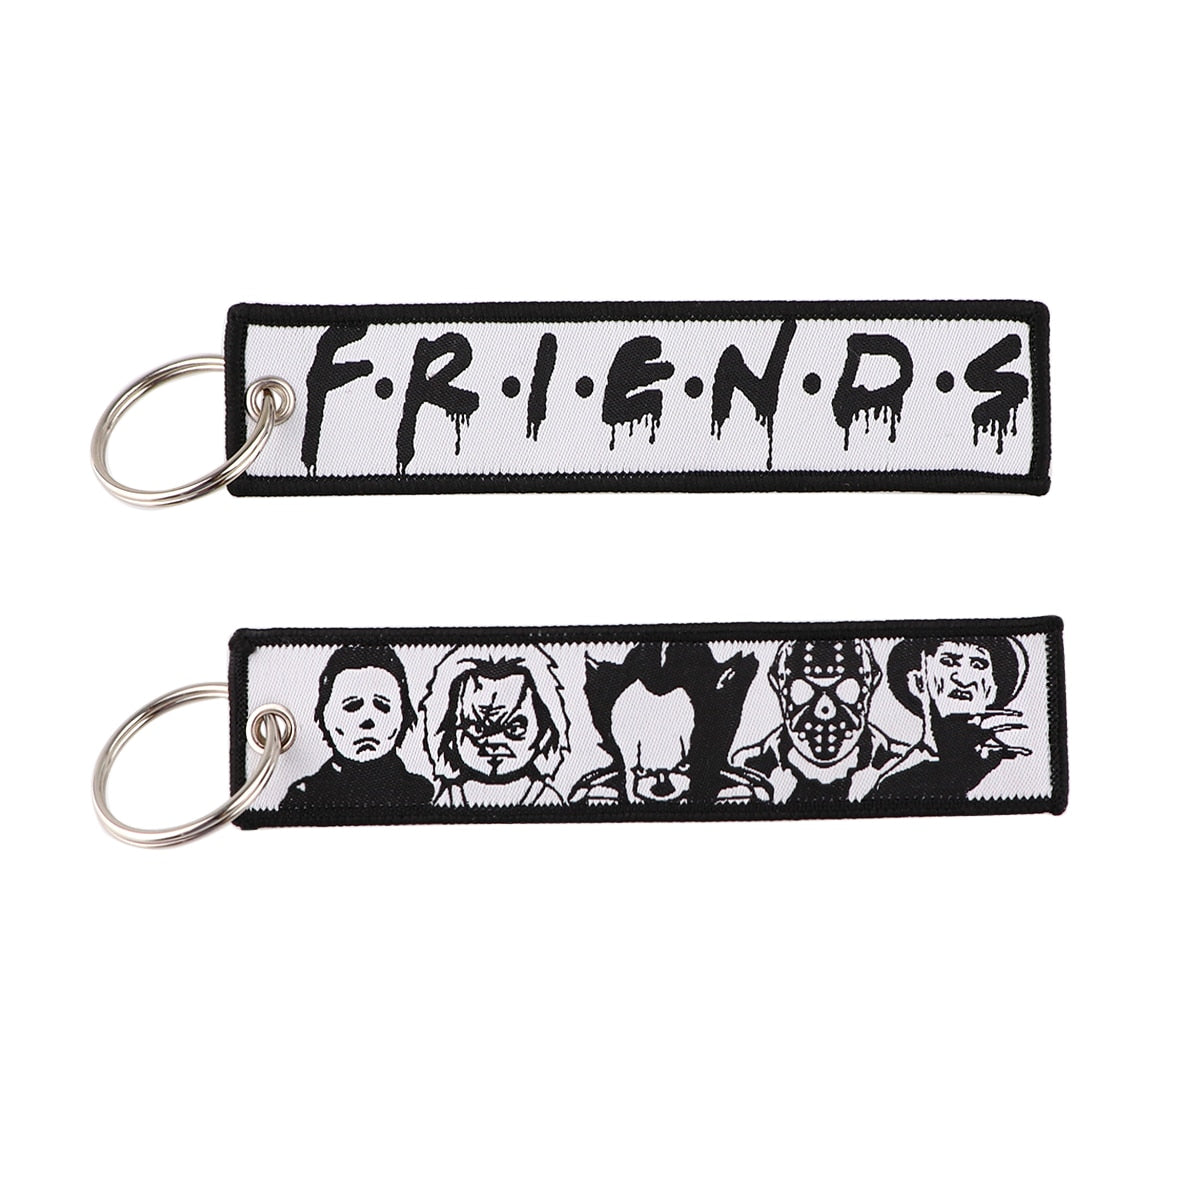 Collectors Item Embroidered Keychains